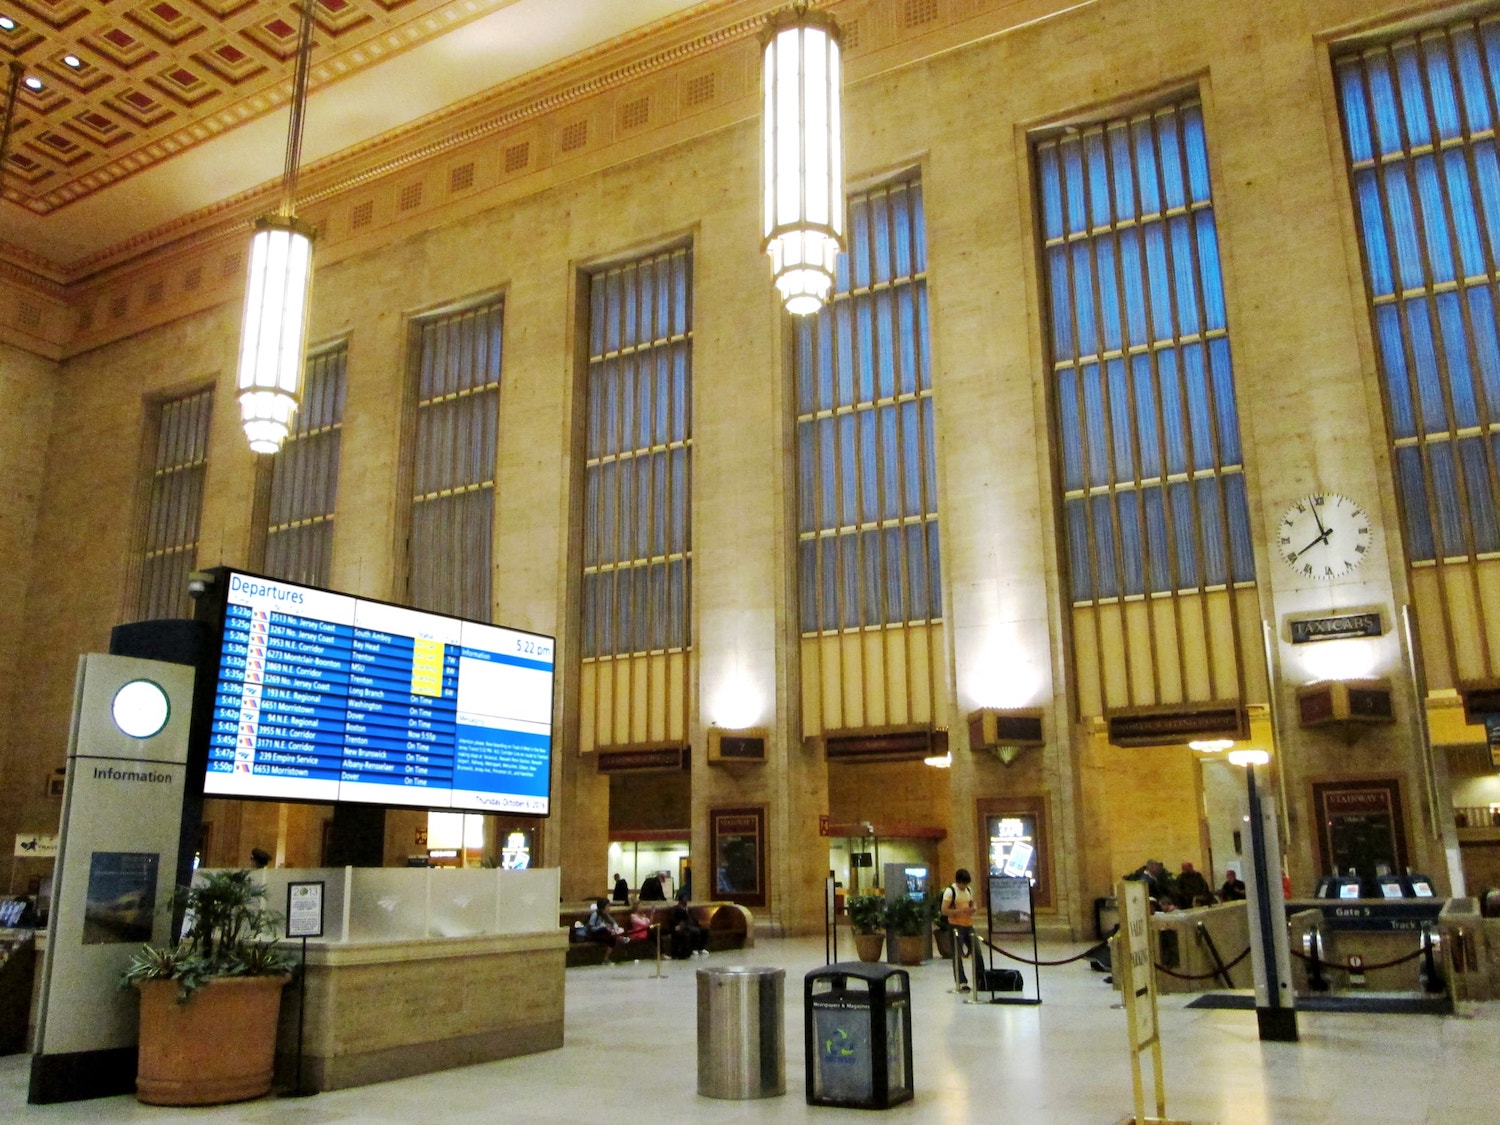 A mockup of 30th Street Station with a digital screen similar to that of Penn Station. The sign is bright and out of place in the historic stone building.